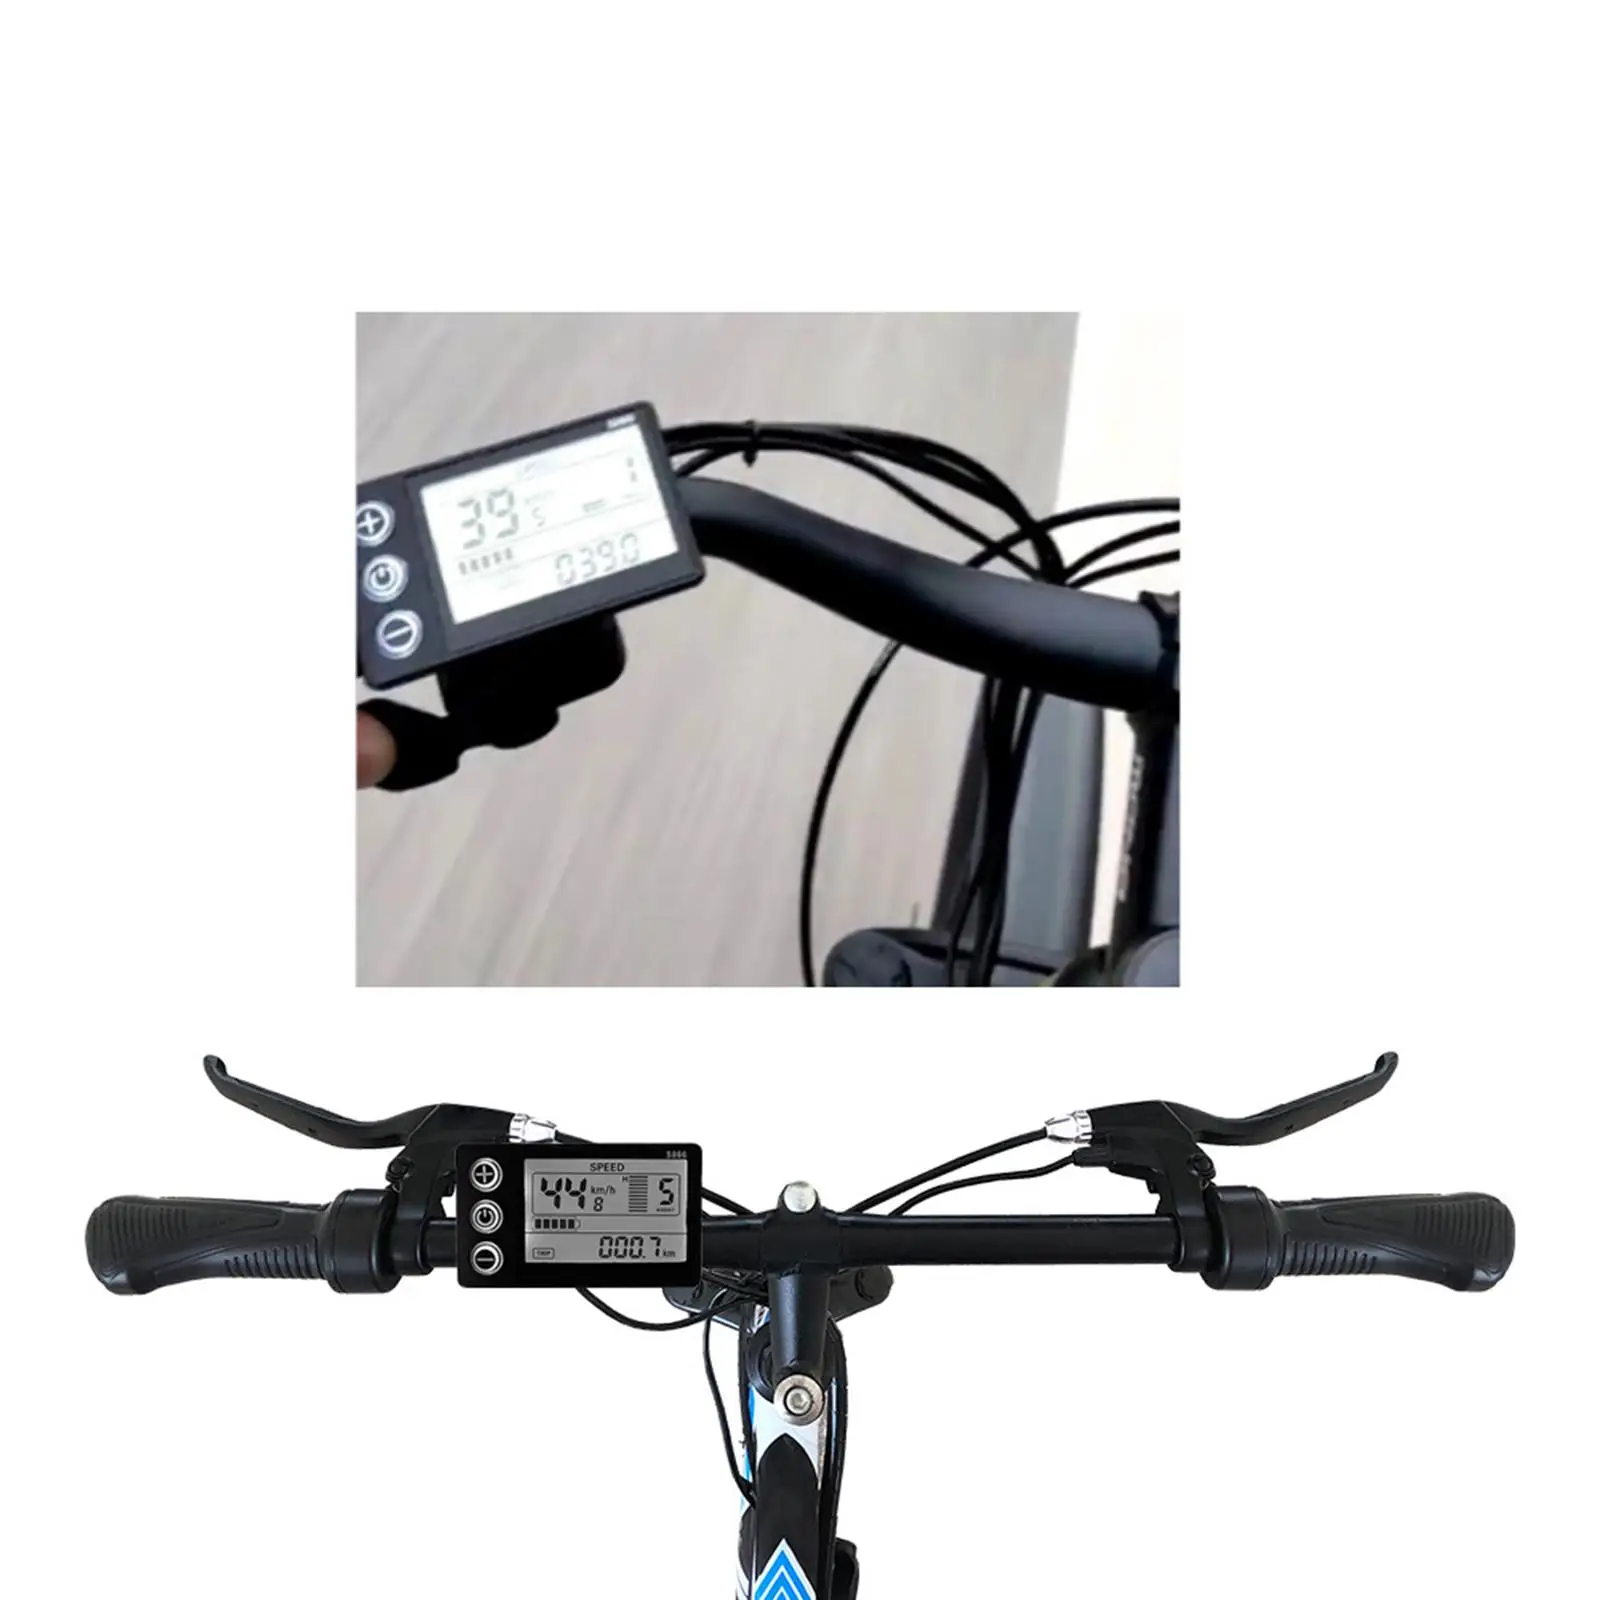 LCD S866 Display Panel Dashboard Useful ABS for Electric Bicycle Scooter Waterproof